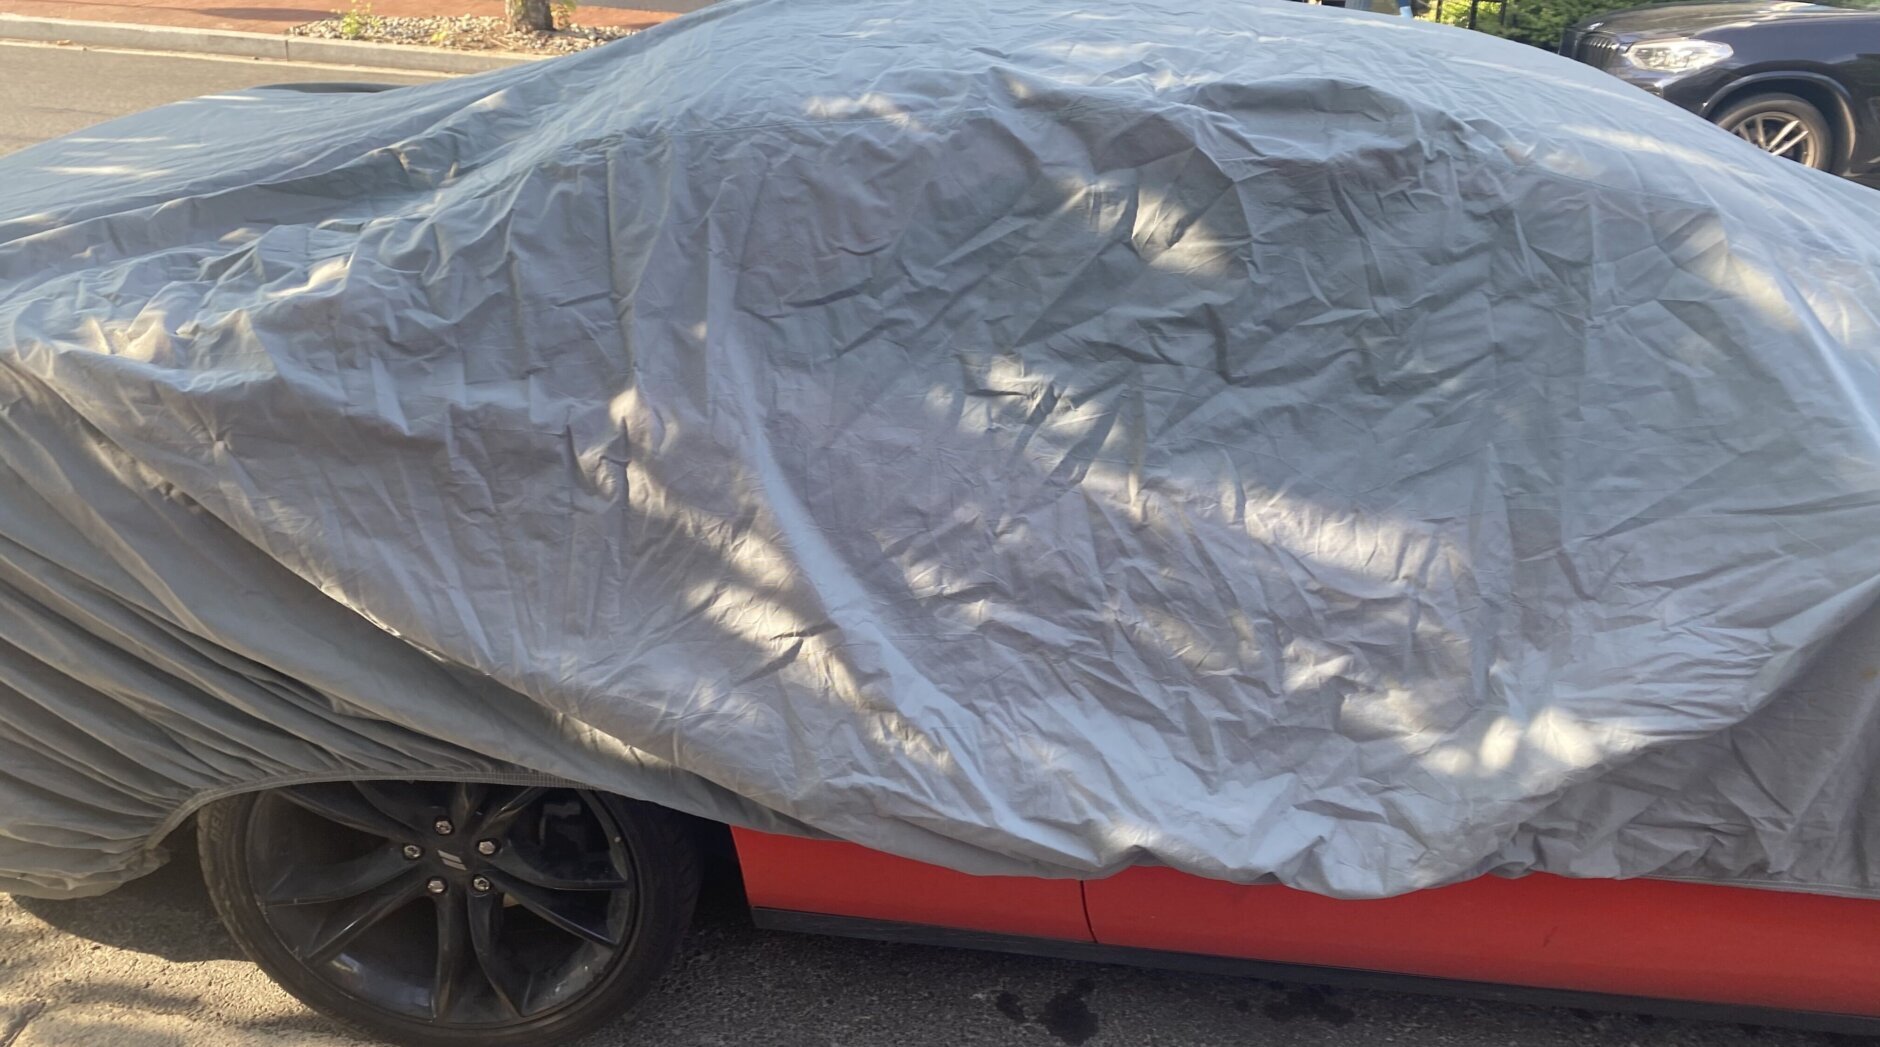 A vehicle with more than 40 unpaid tickets is seen under a cover in Northwest D.C.